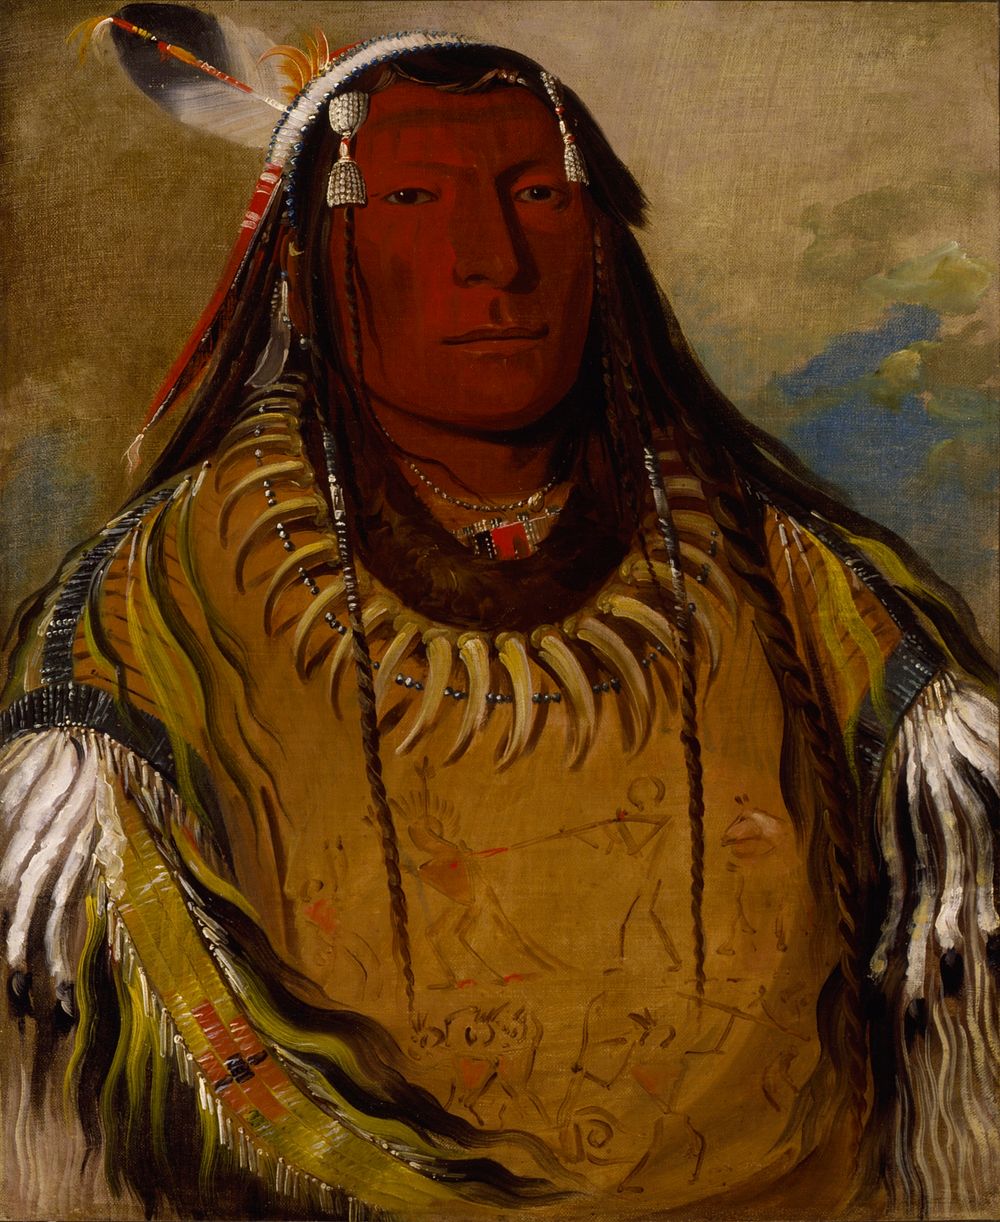 Pa-ris-ka-roó-pa, Two Crows, a Chief by George Catlin